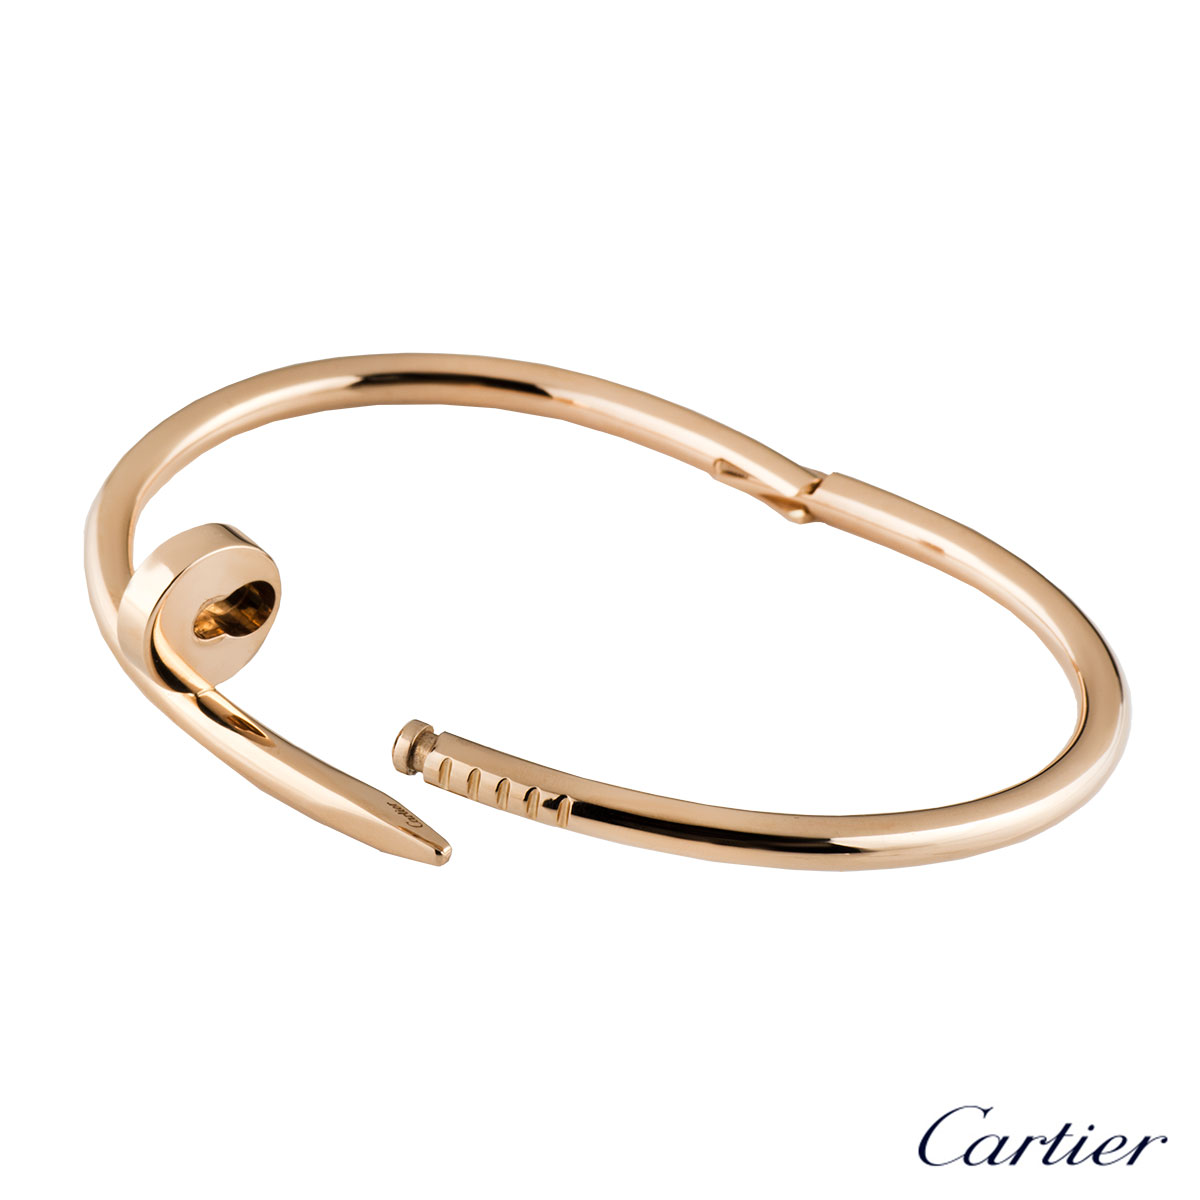 cartier nail bracelet how to open